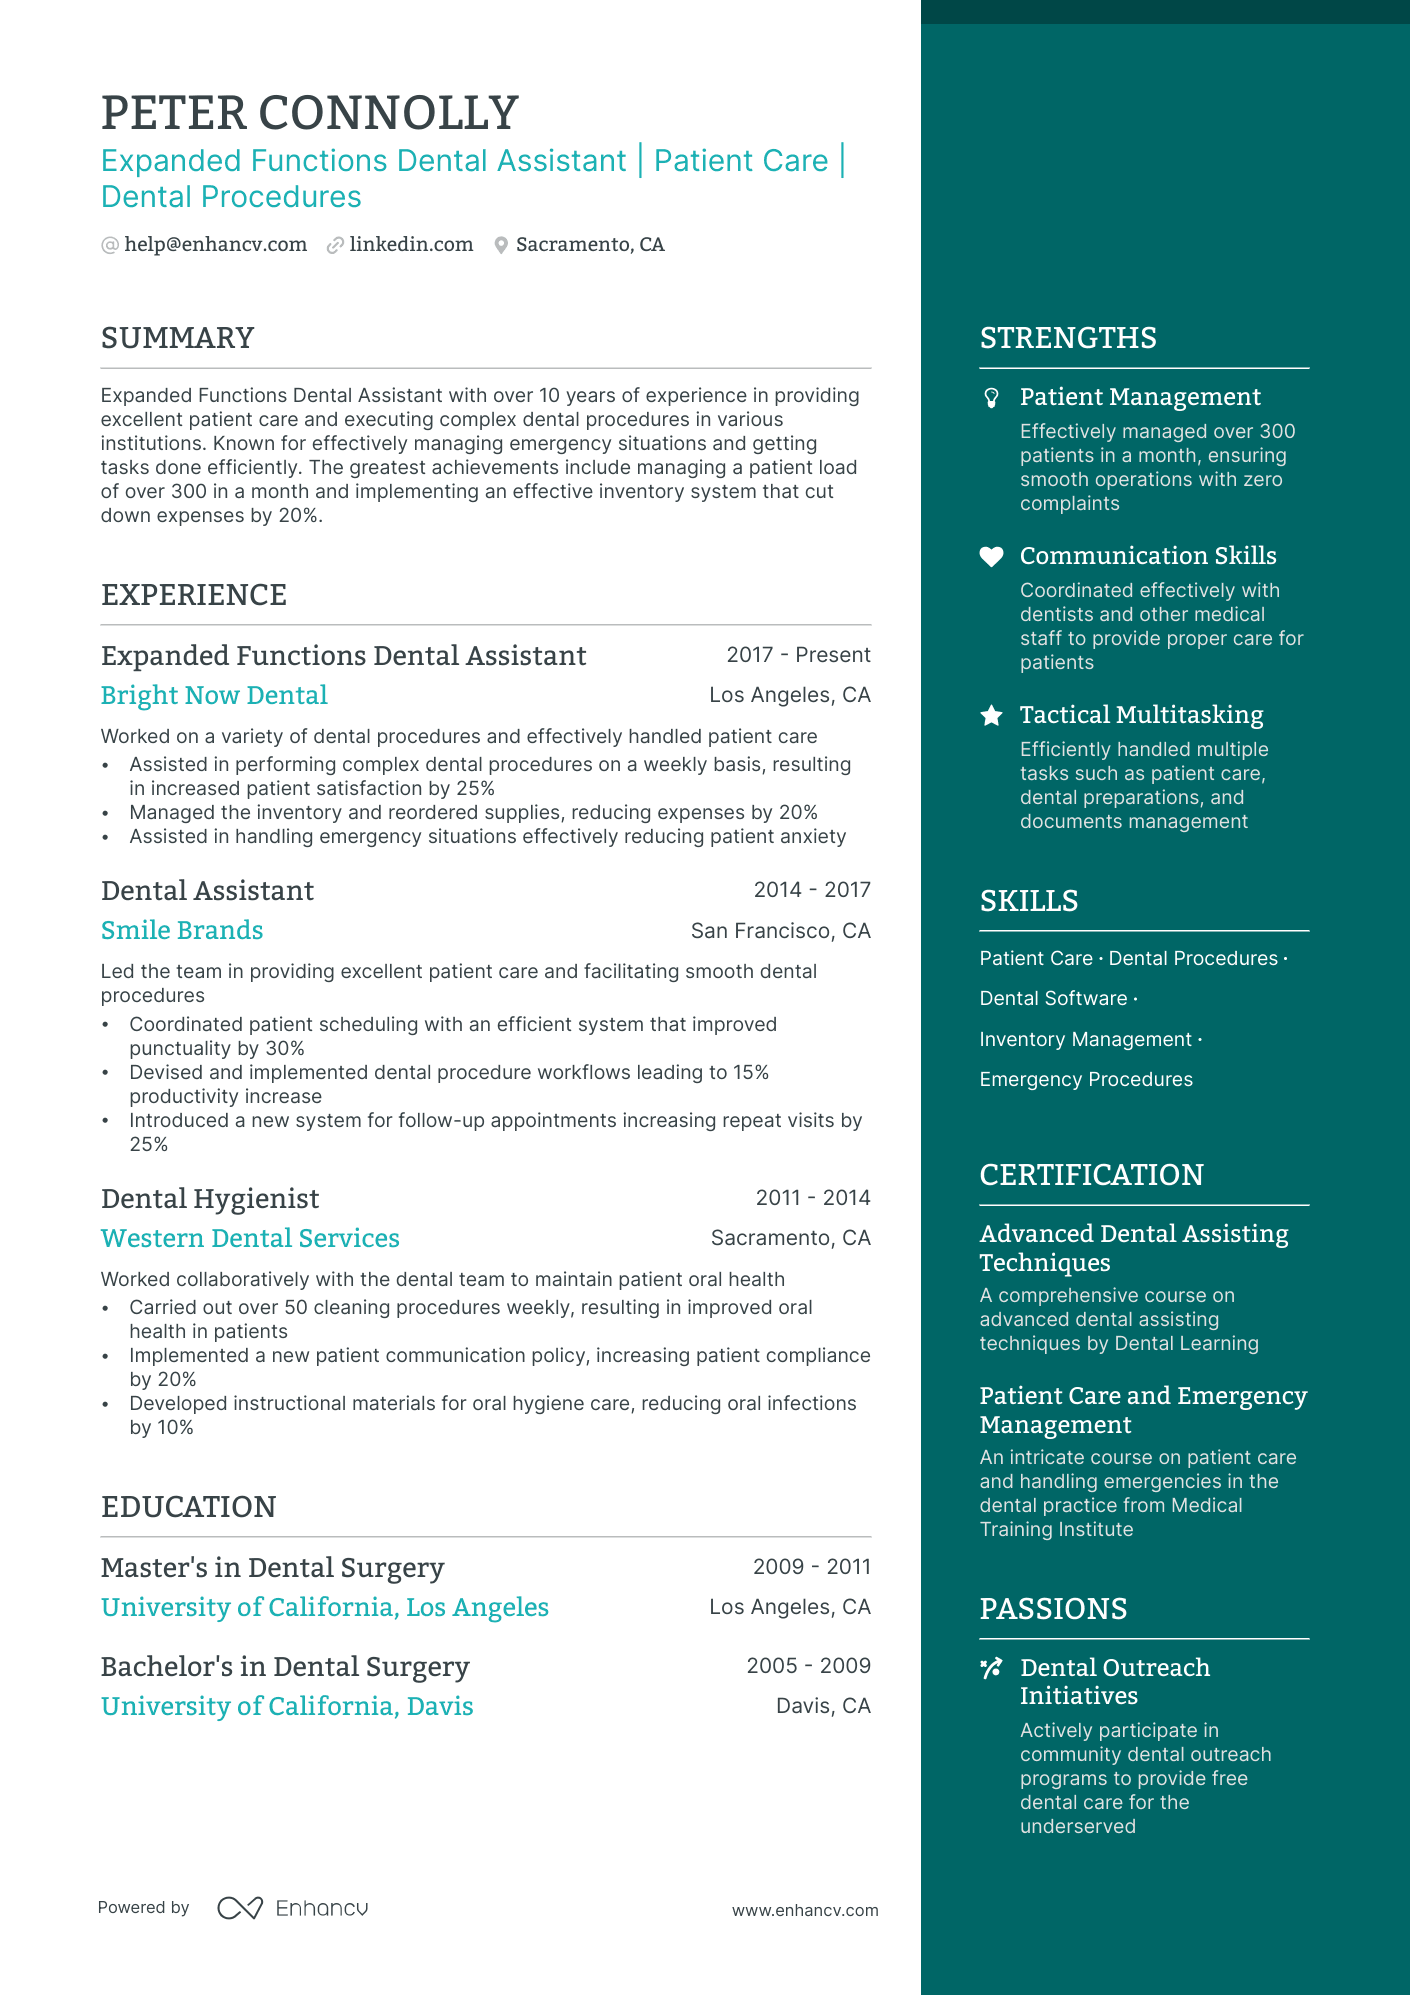 Expanded Functions Dental Assistant resume example